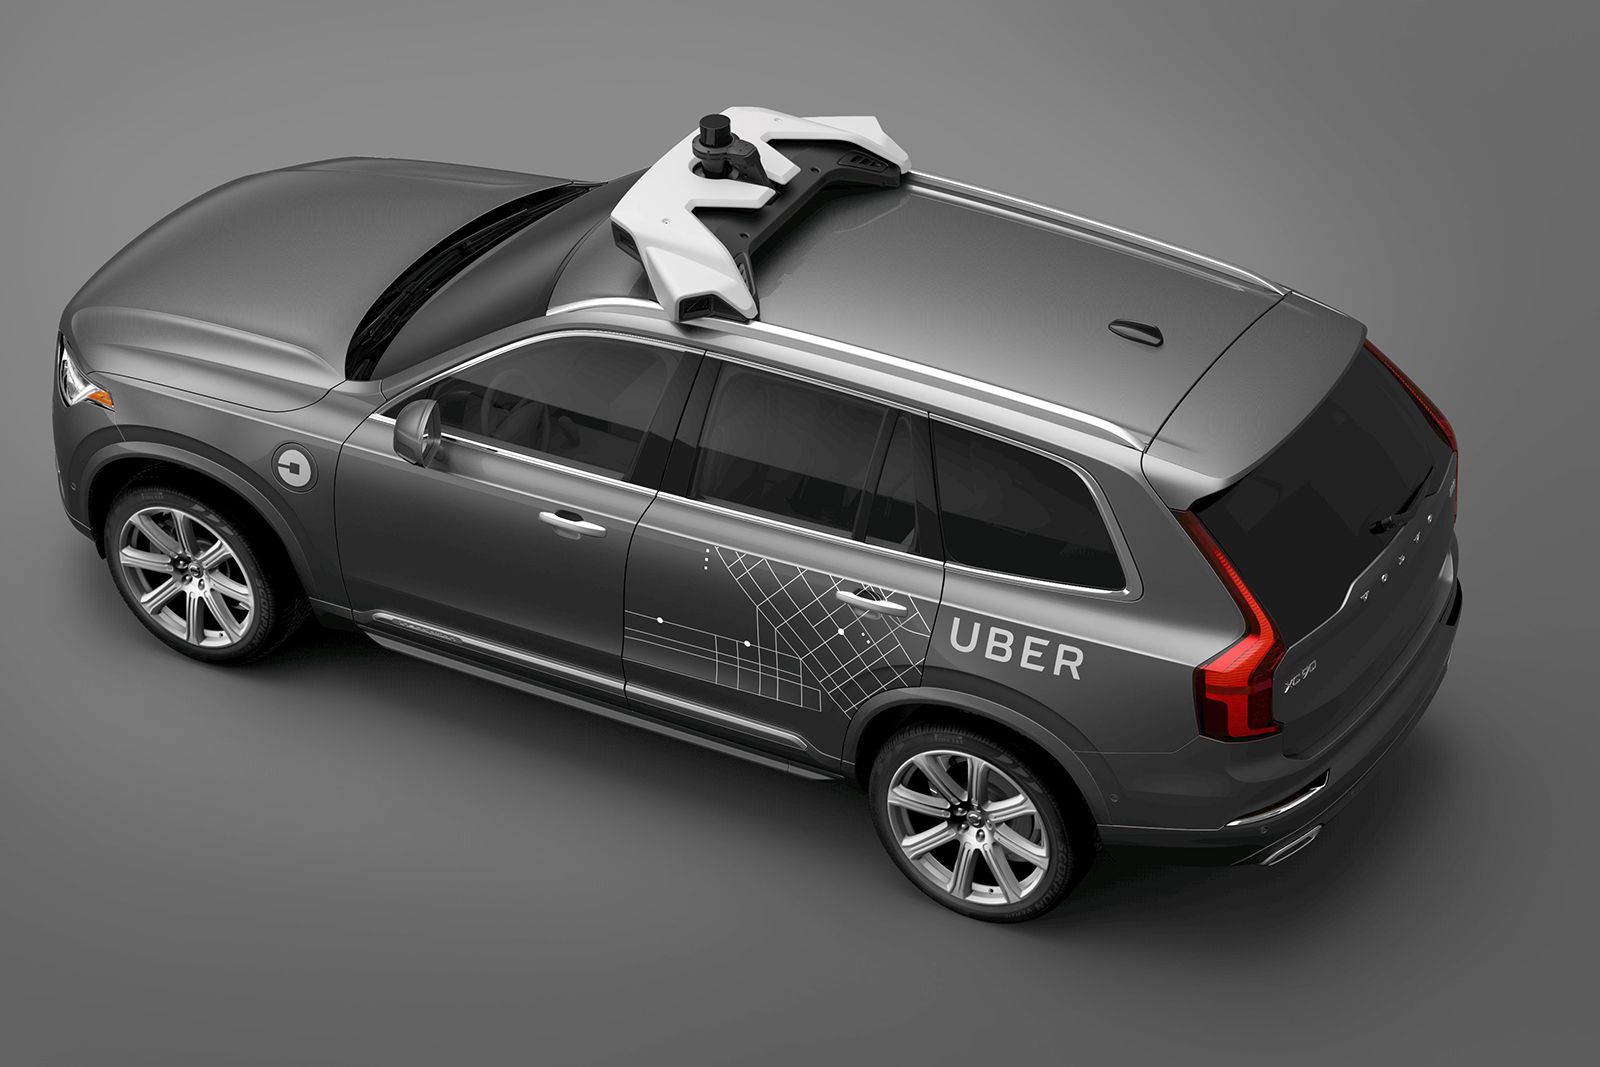 Uber bought 24000 of these Volvo SUVs for its self-driving car fleet image 2